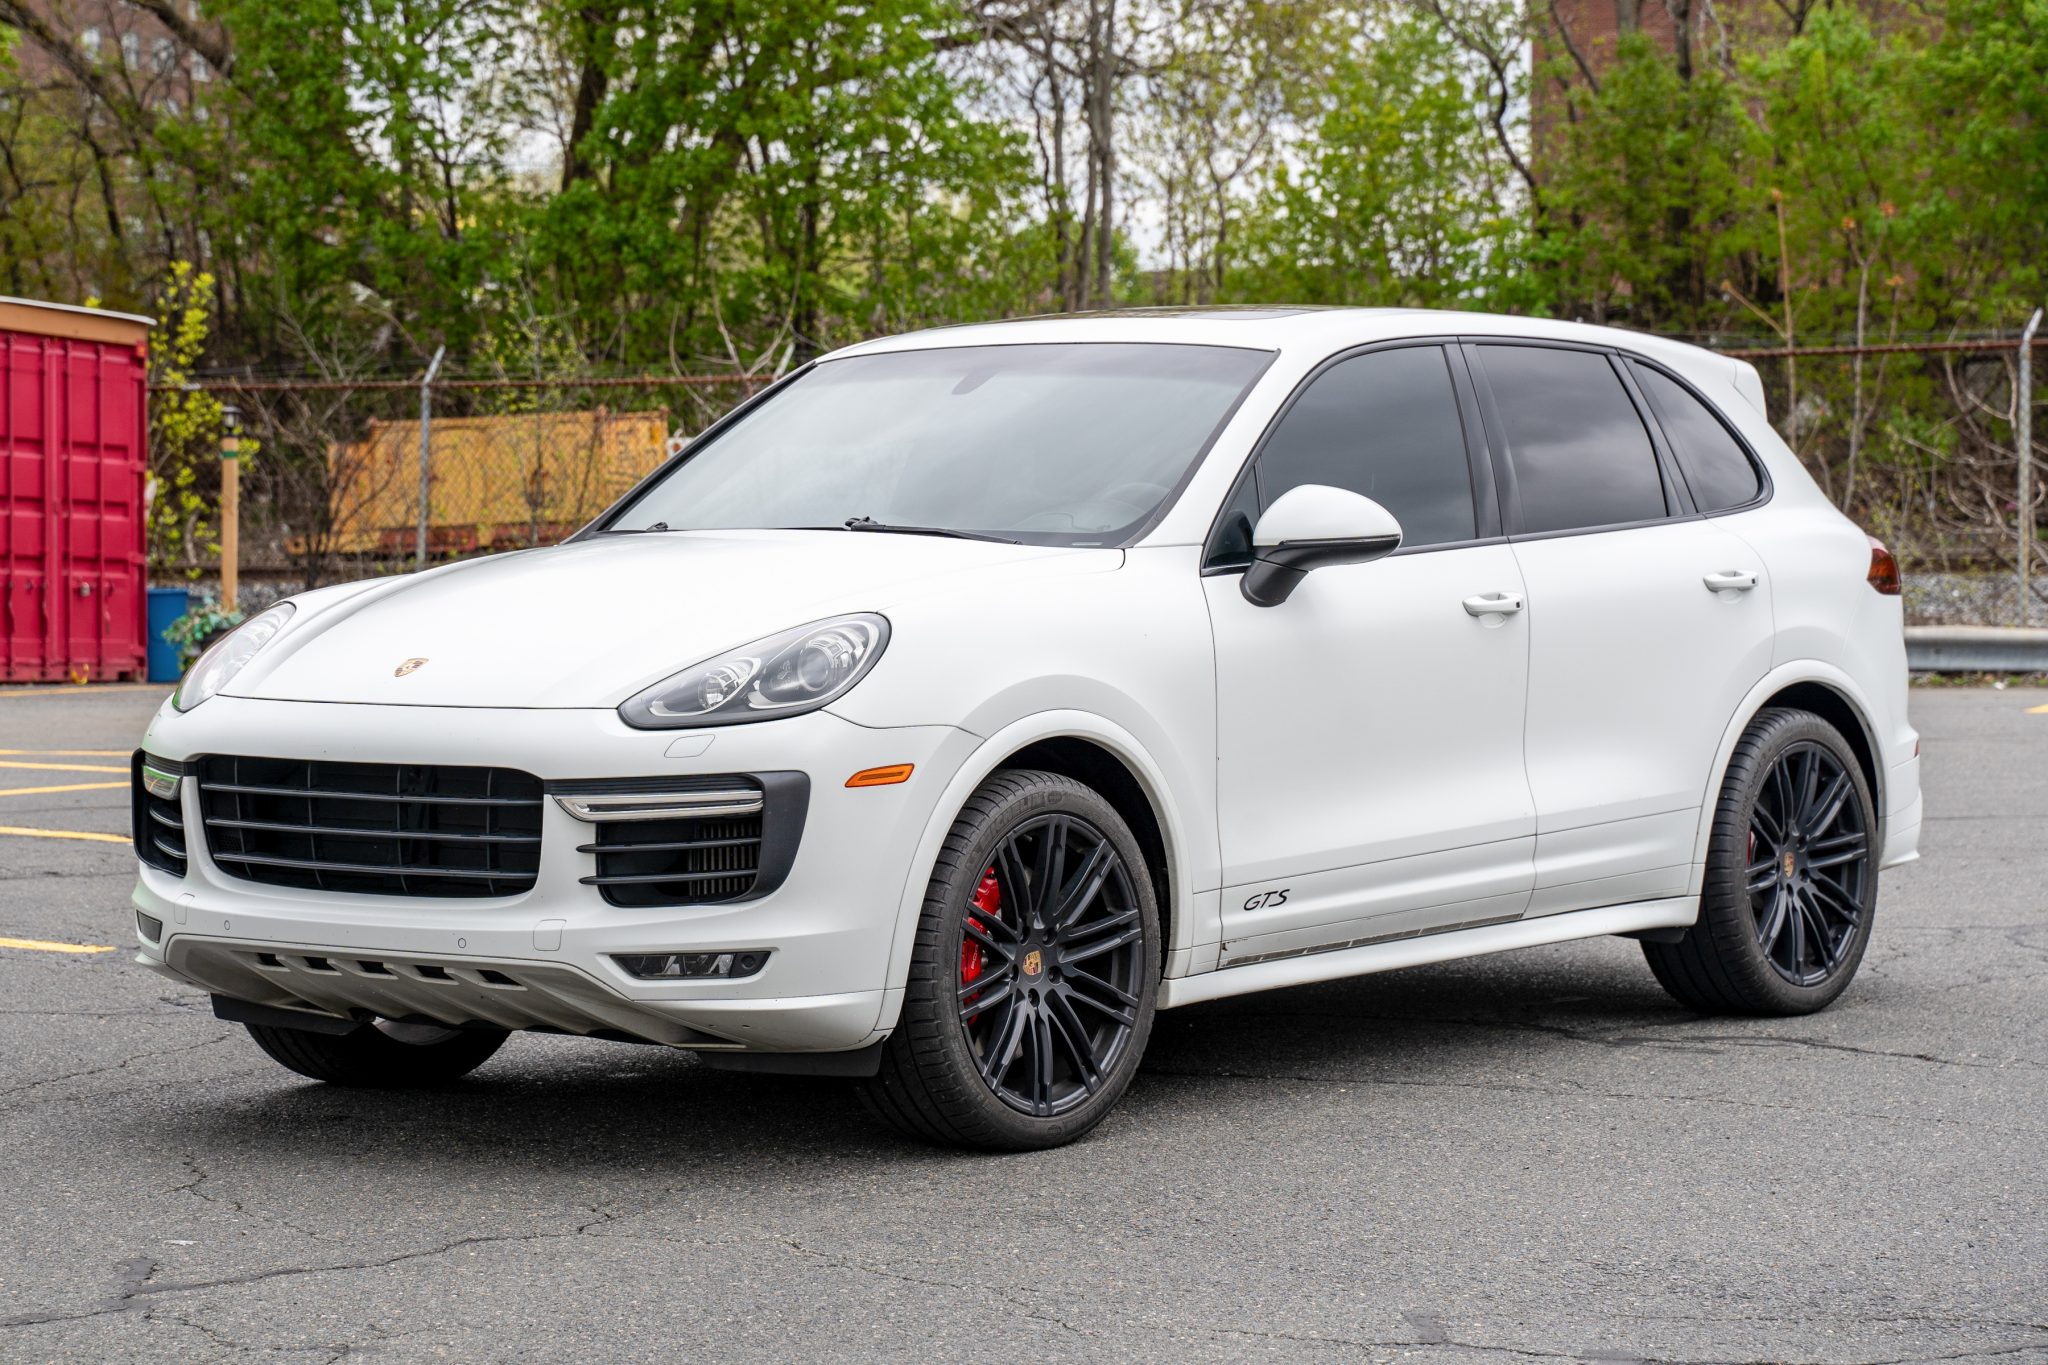 Used 2016 Porsche Cayenne GTS Review